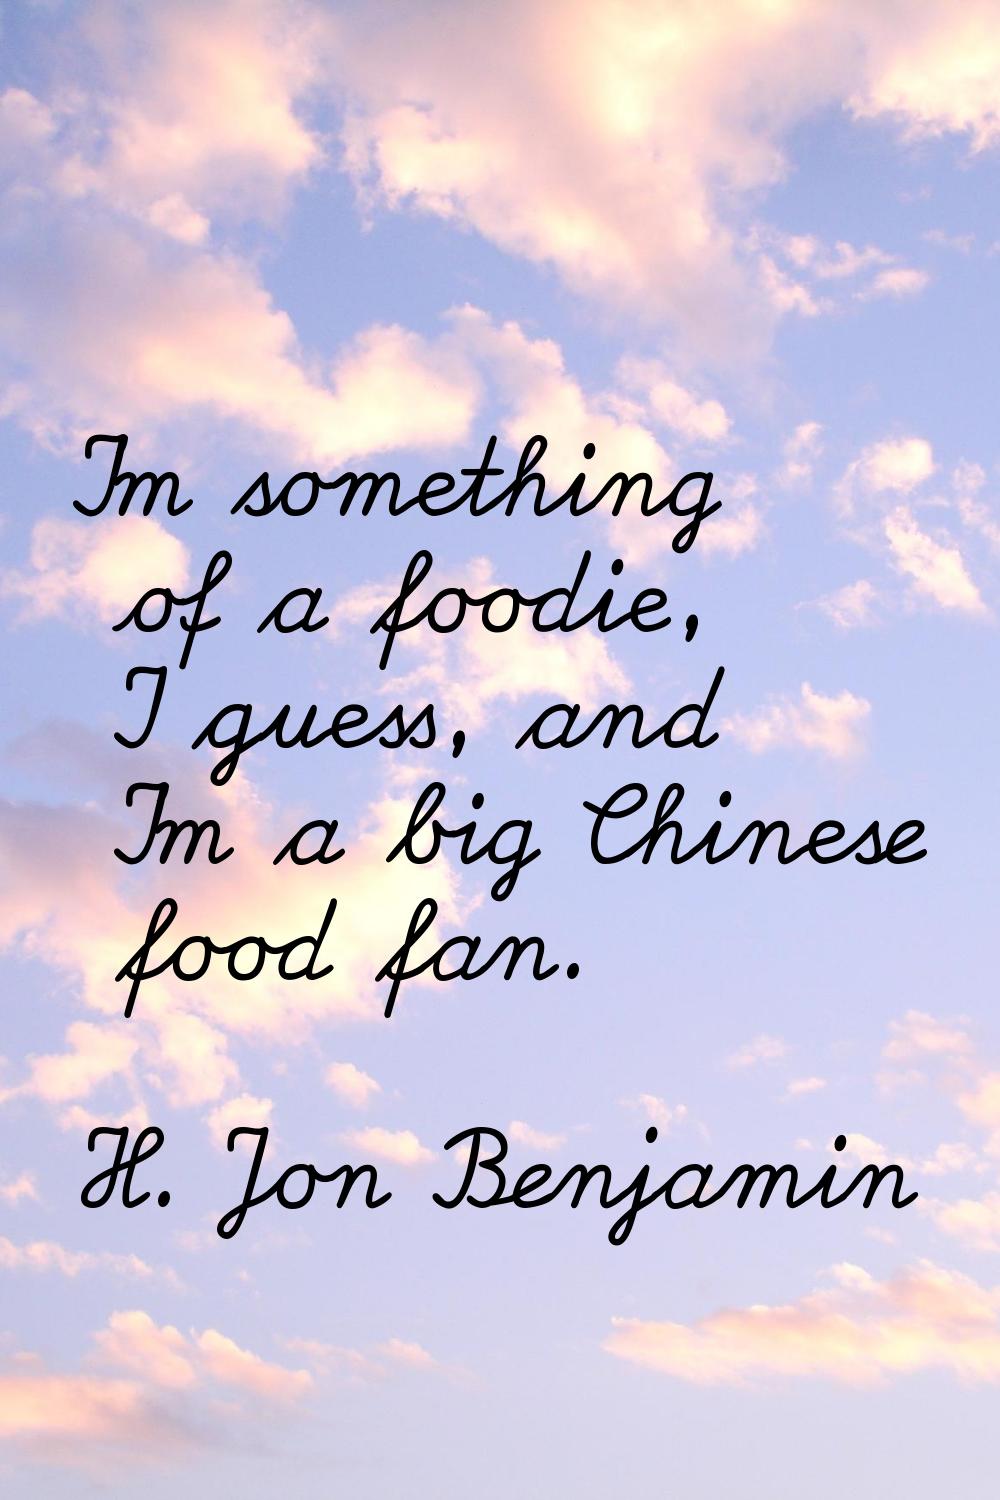 I'm something of a foodie, I guess, and I'm a big Chinese food fan.